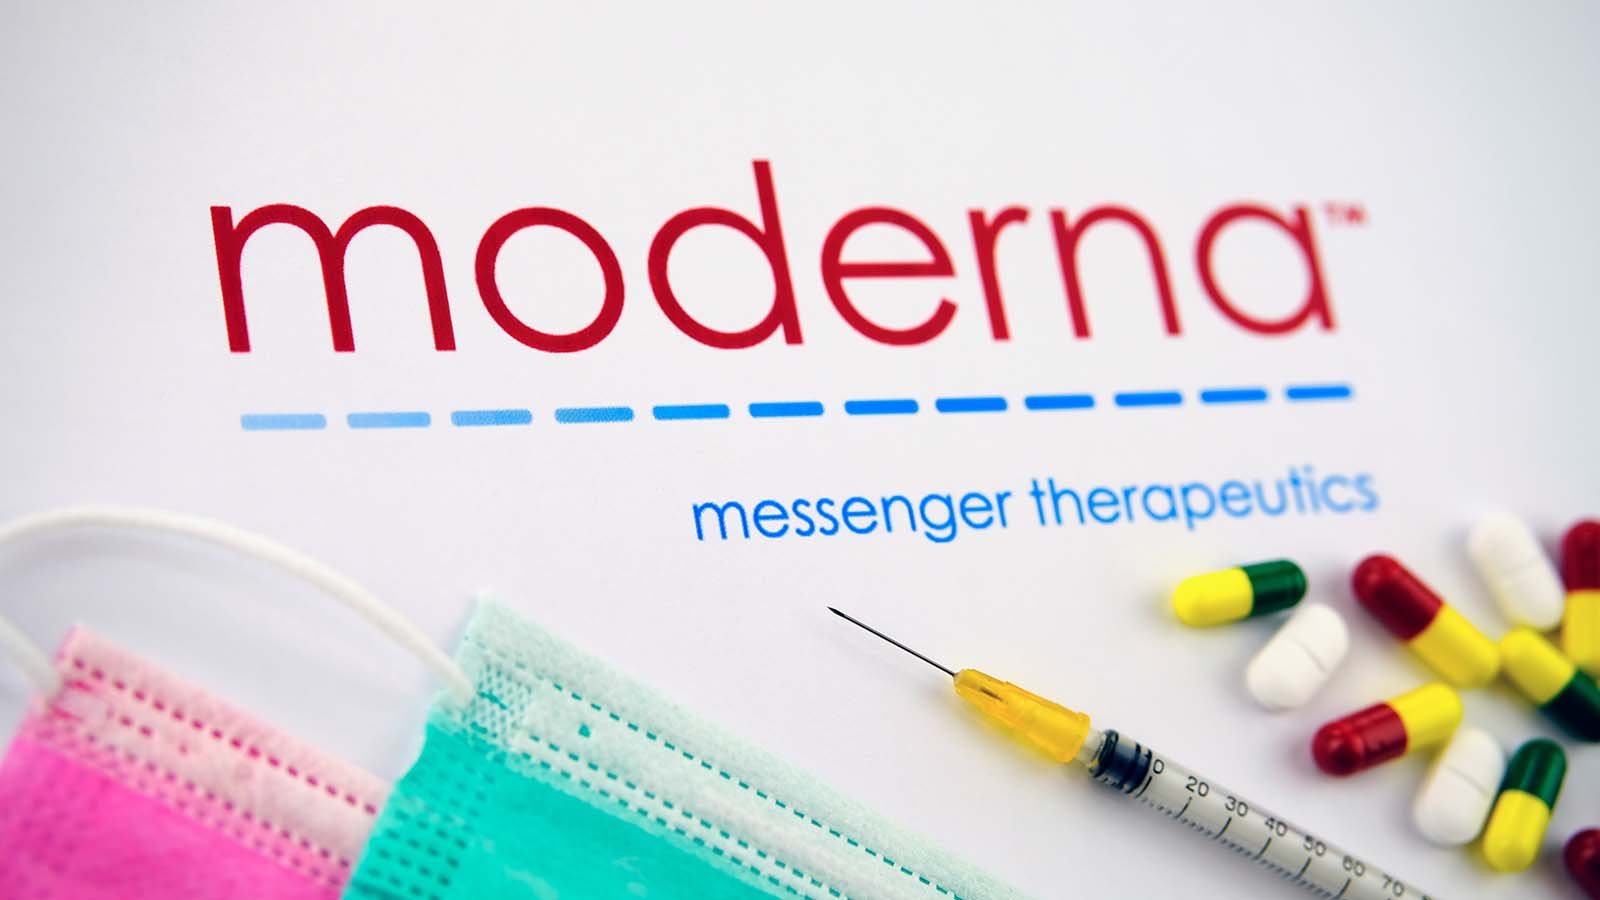 The Moderna (MRNA Stock) logo surrounded by syringes, pills and disposable face masks.